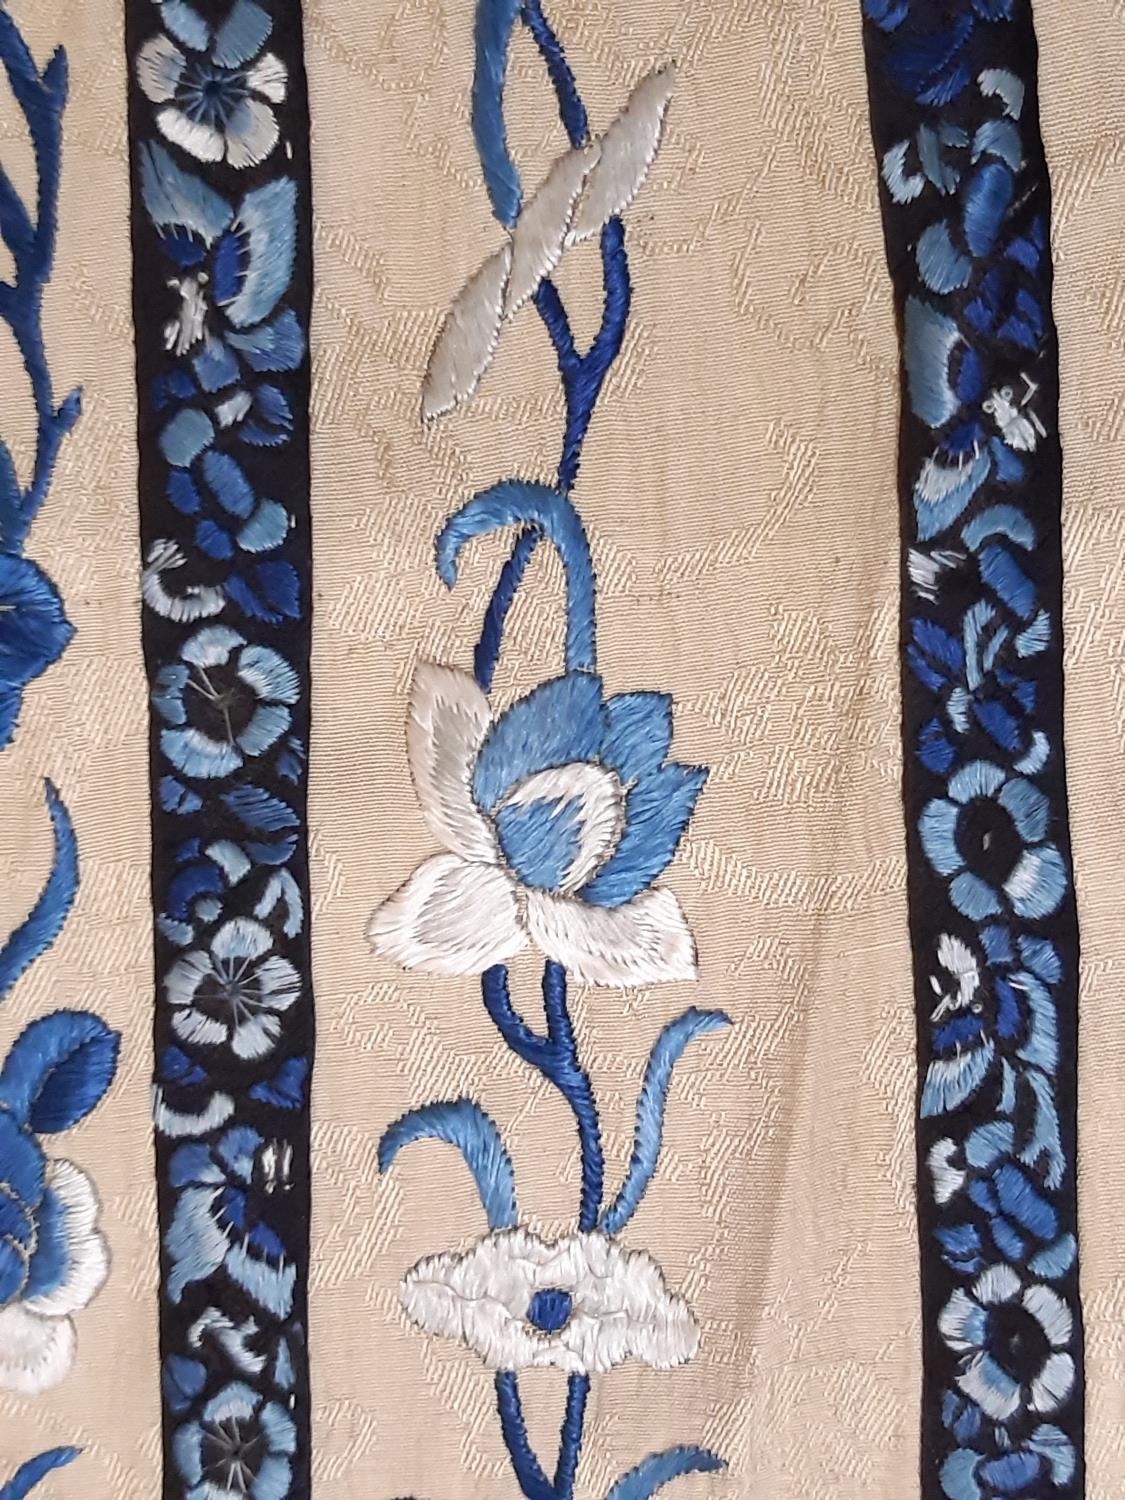 19th century Chinese lower section of skirt panel, with front sections heavily embroidered with - Image 9 of 11